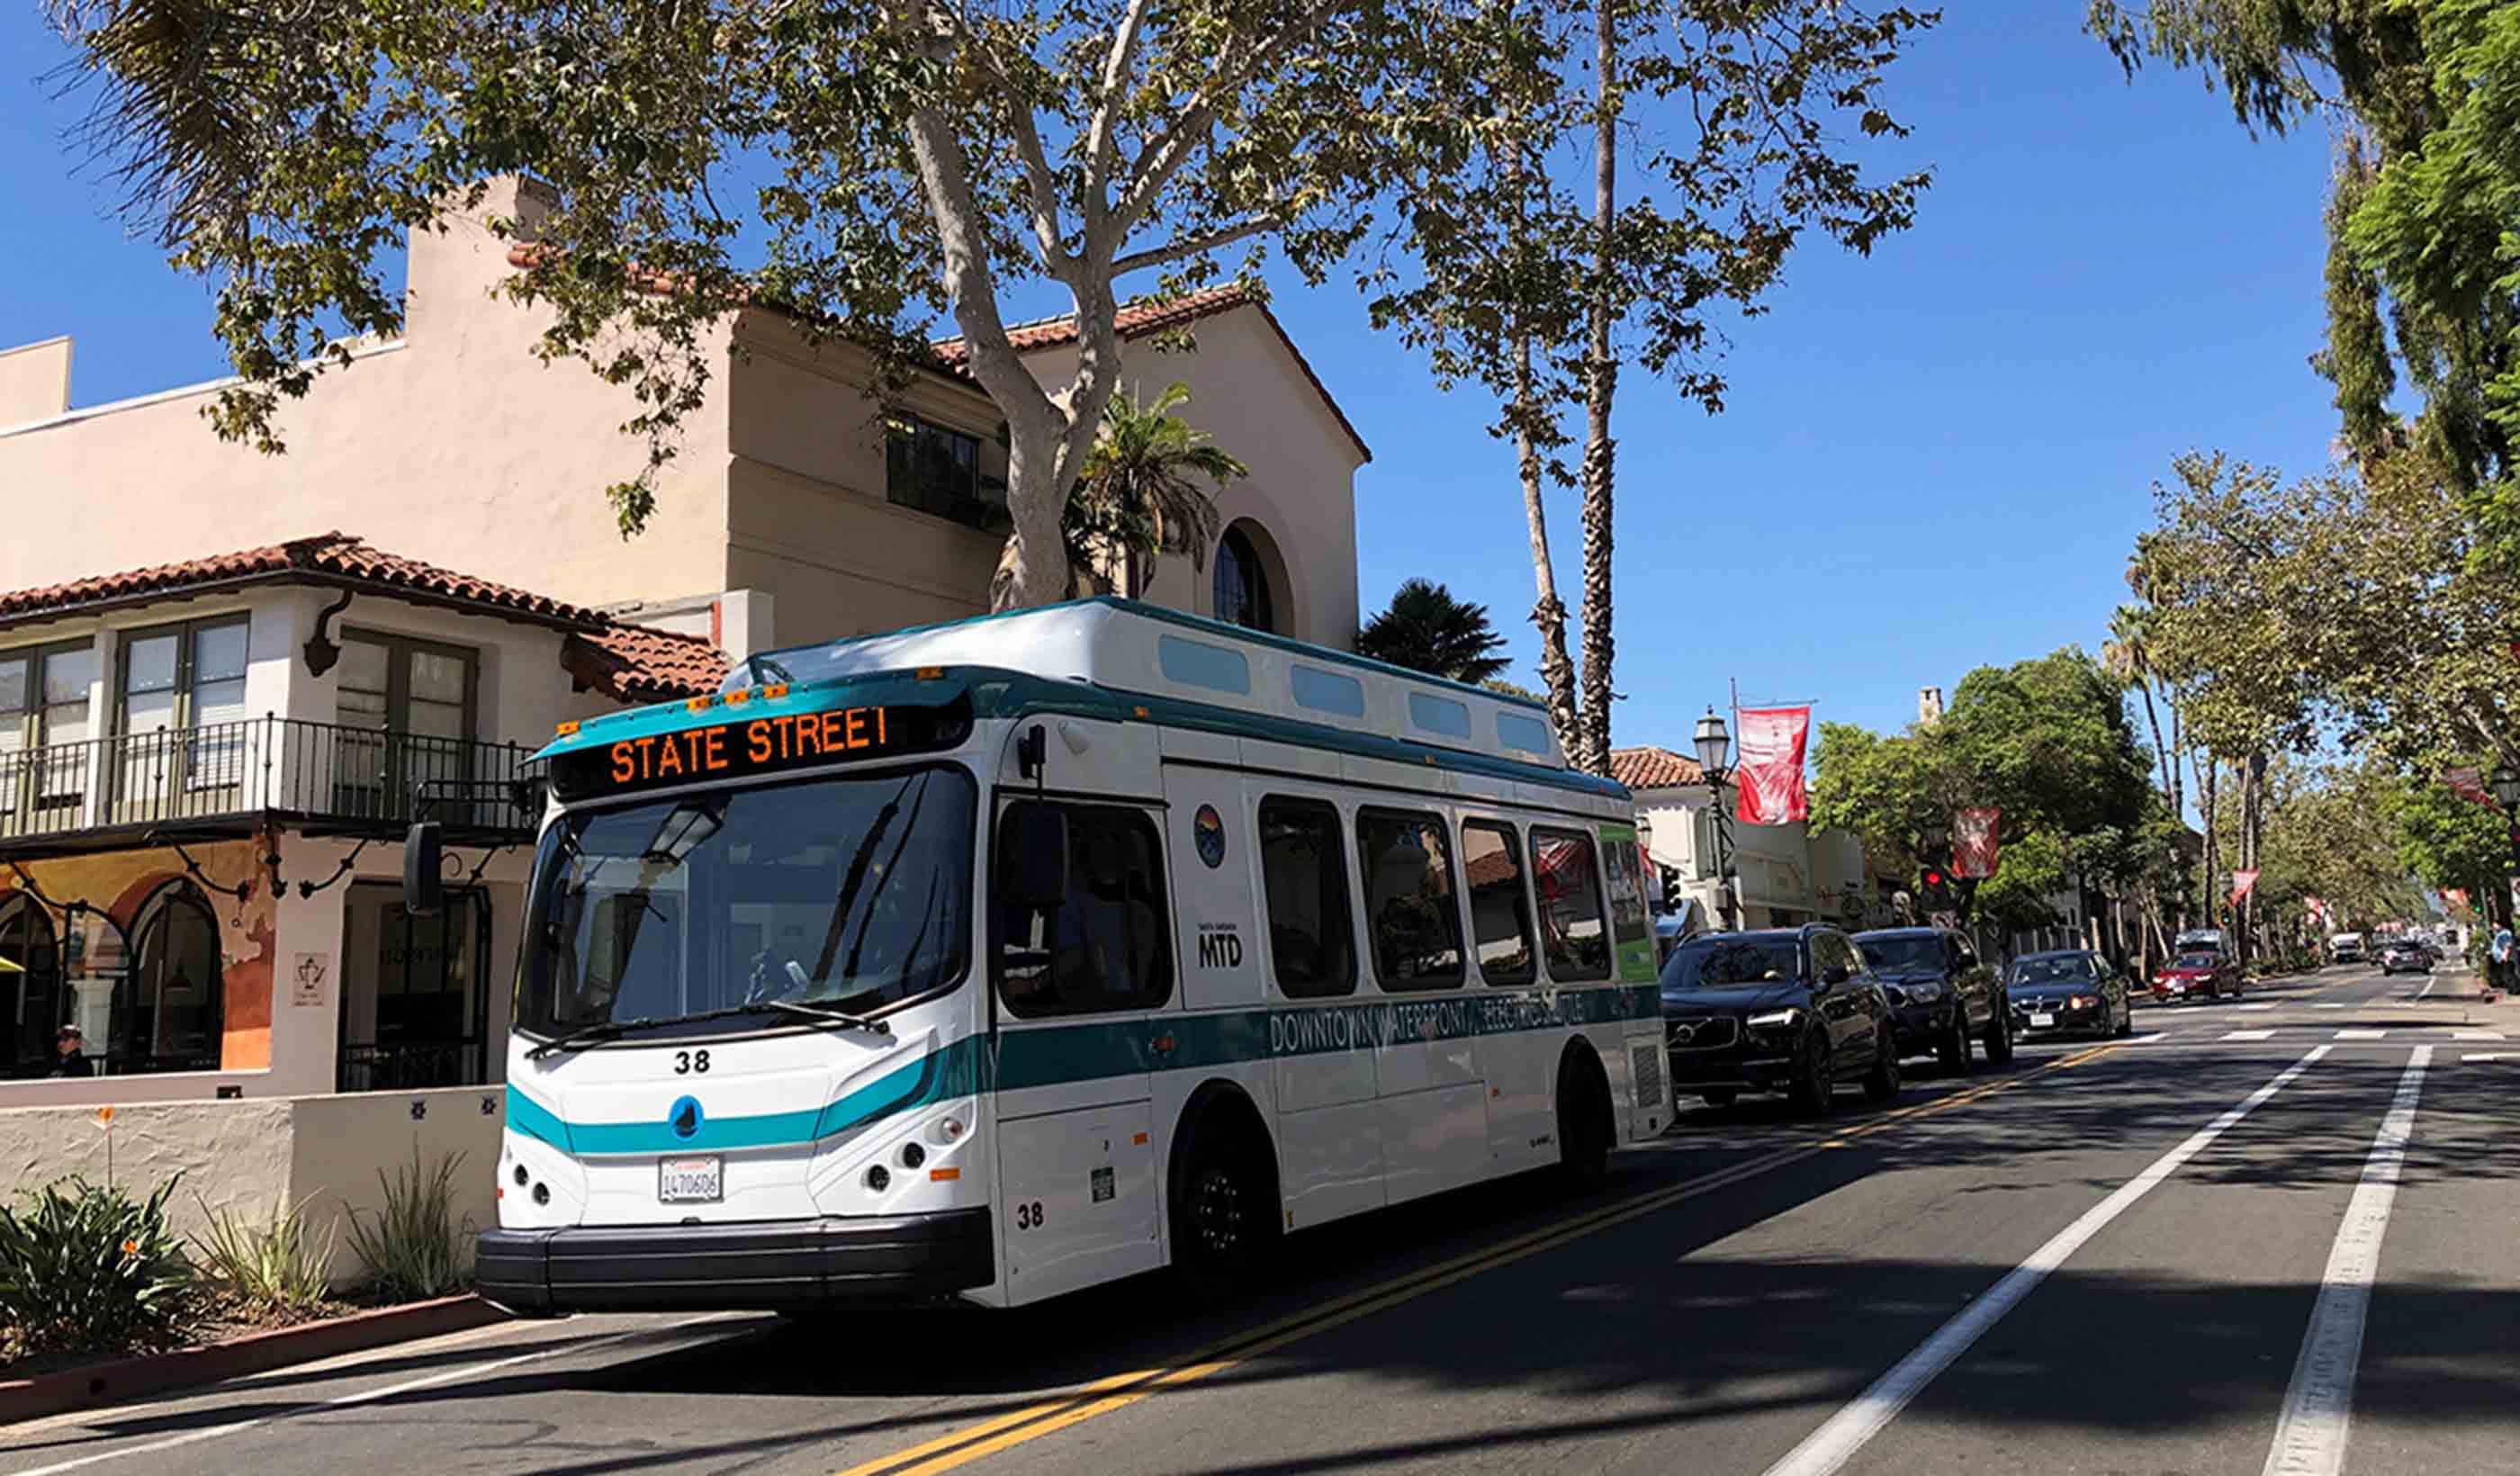 Published in METRO: 4 Factors to Consider For Zero-Emission Bus Fleet Transition